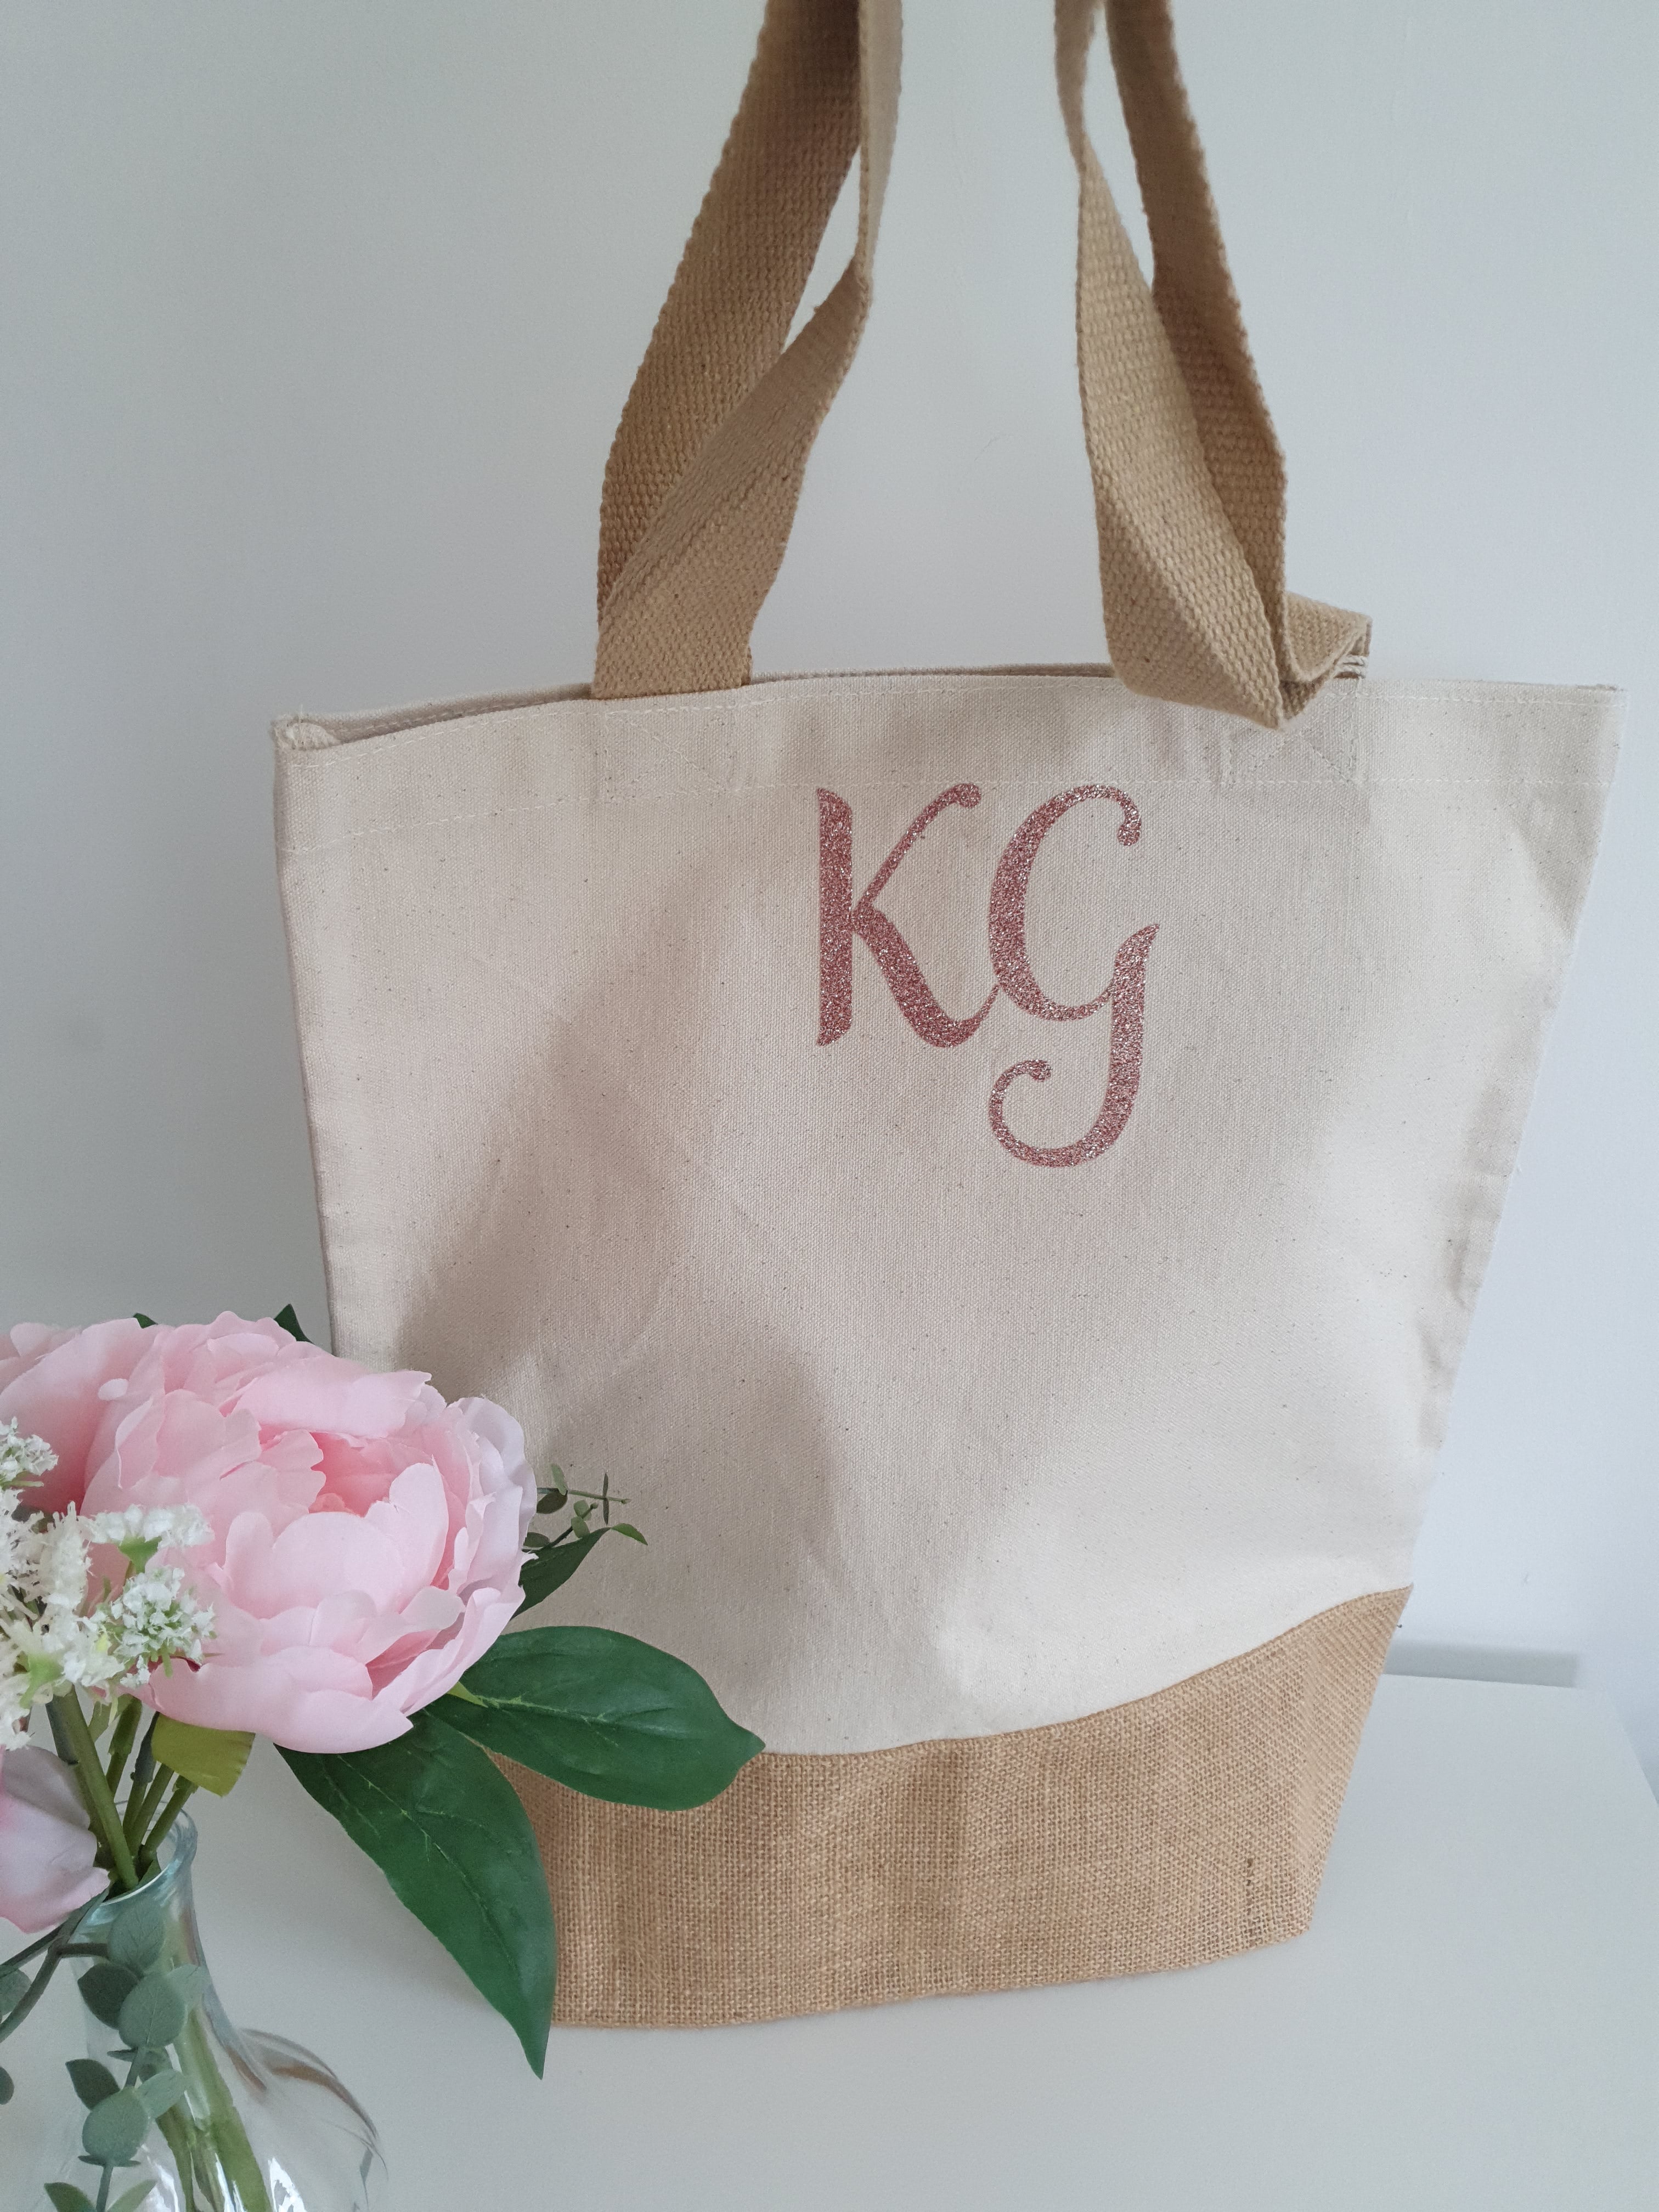 Personalized tote bags are a stylish way to carry your personality -  Invoguishindia